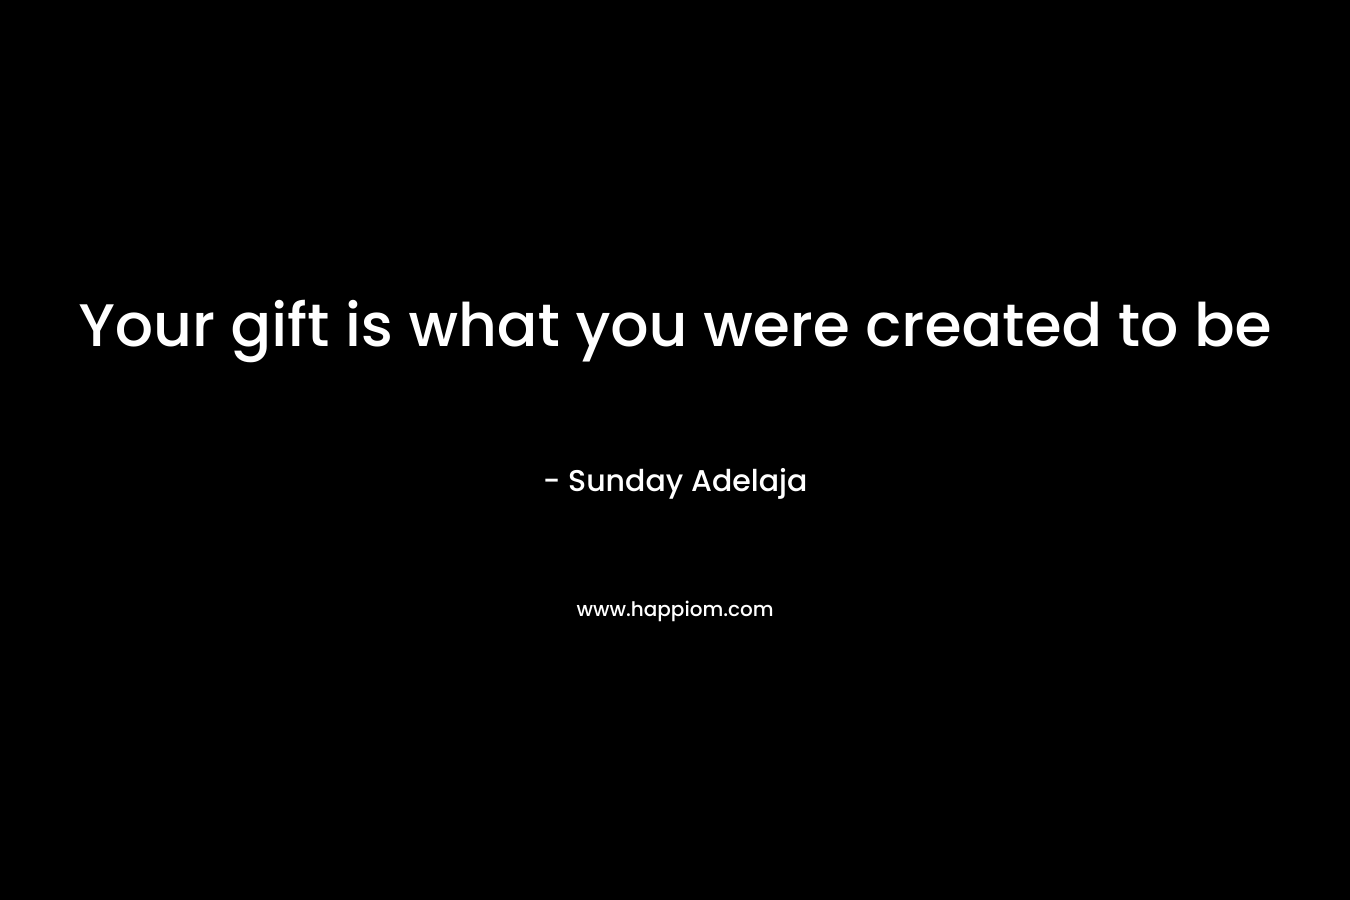 Your gift is what you were created to be